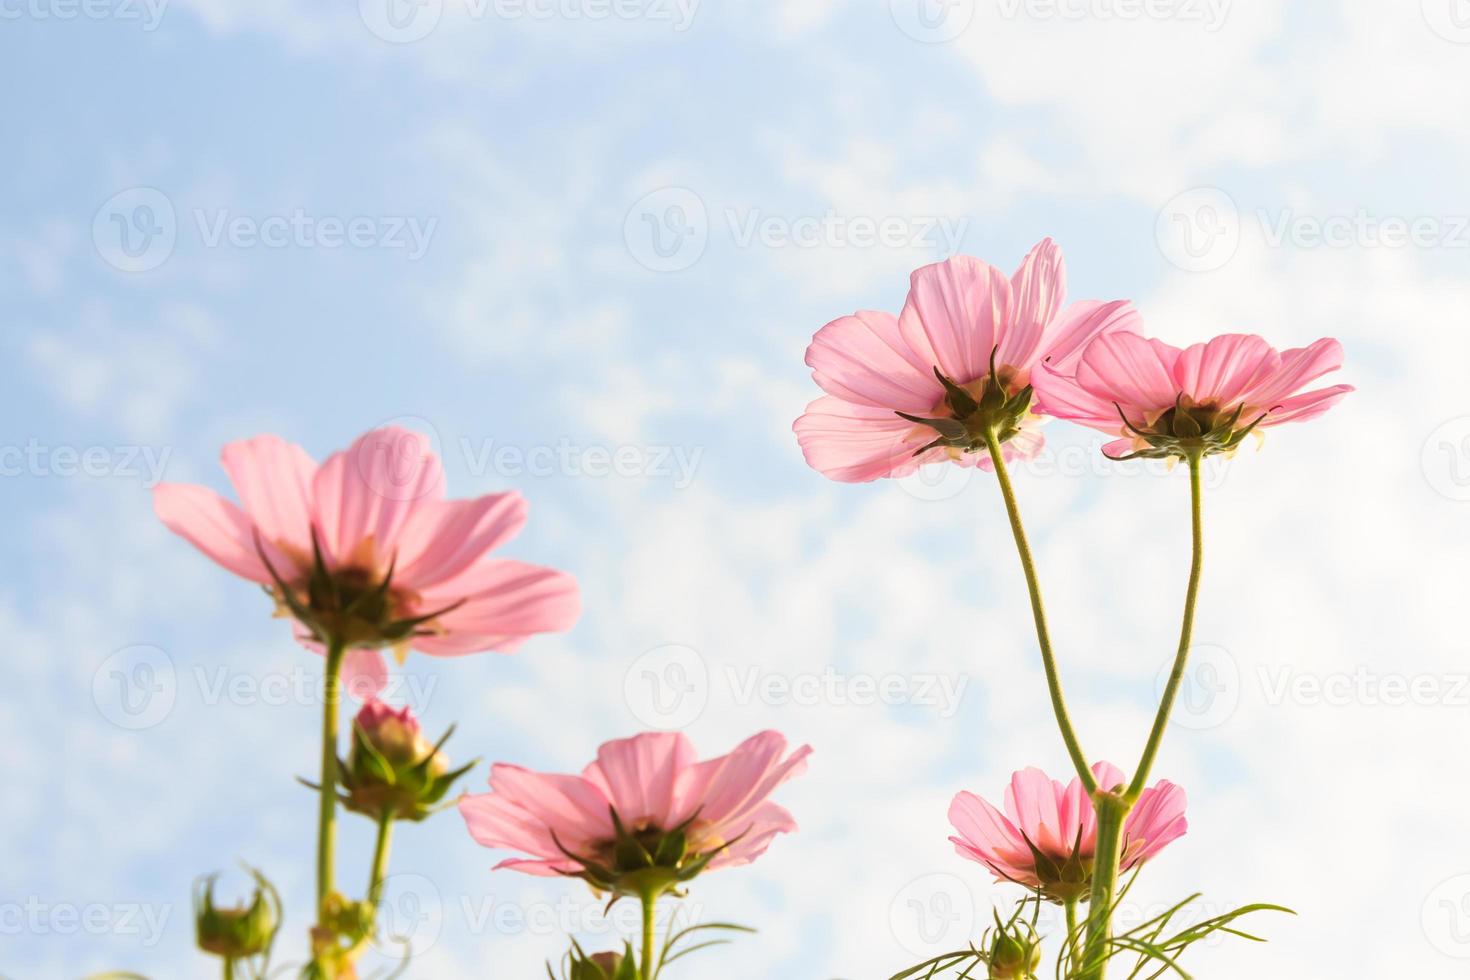 pink cosmos  Cosmos sulphureus  with translucent at petal and cloudy blue sky photo